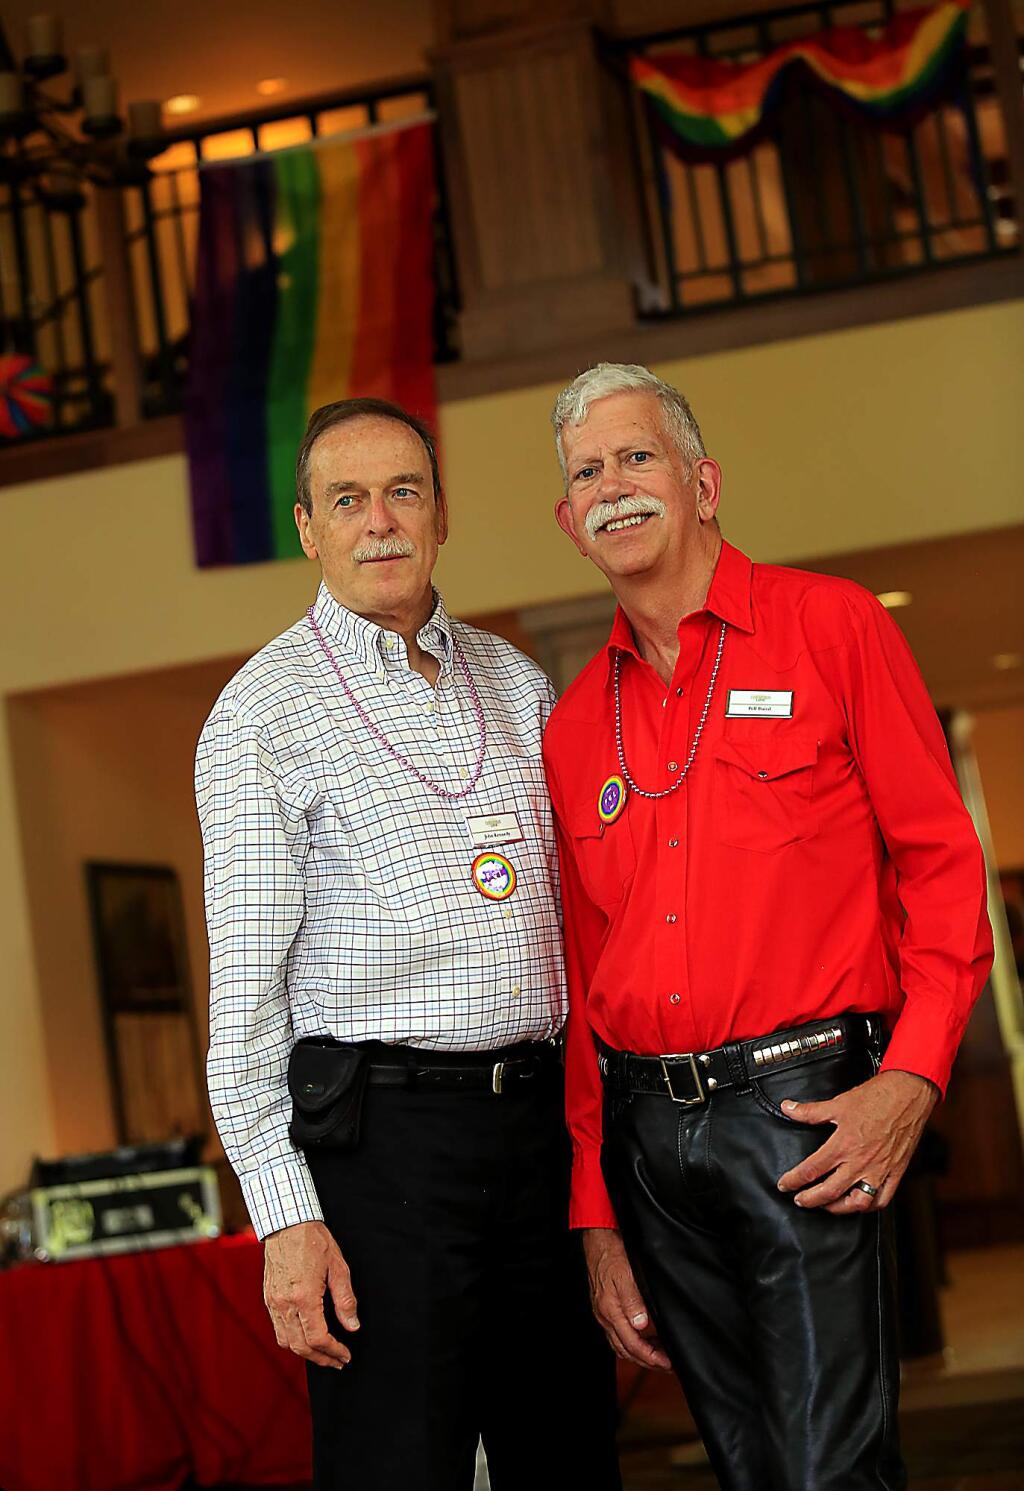 John Kennedy, left, and his husband Bill Baird have been together for 36 years. They celebrated at a Pride party at the Fountaingrove Lodge in Santa Rosa on Saturday night. (JOHN BURGESS / The Press Democrat)